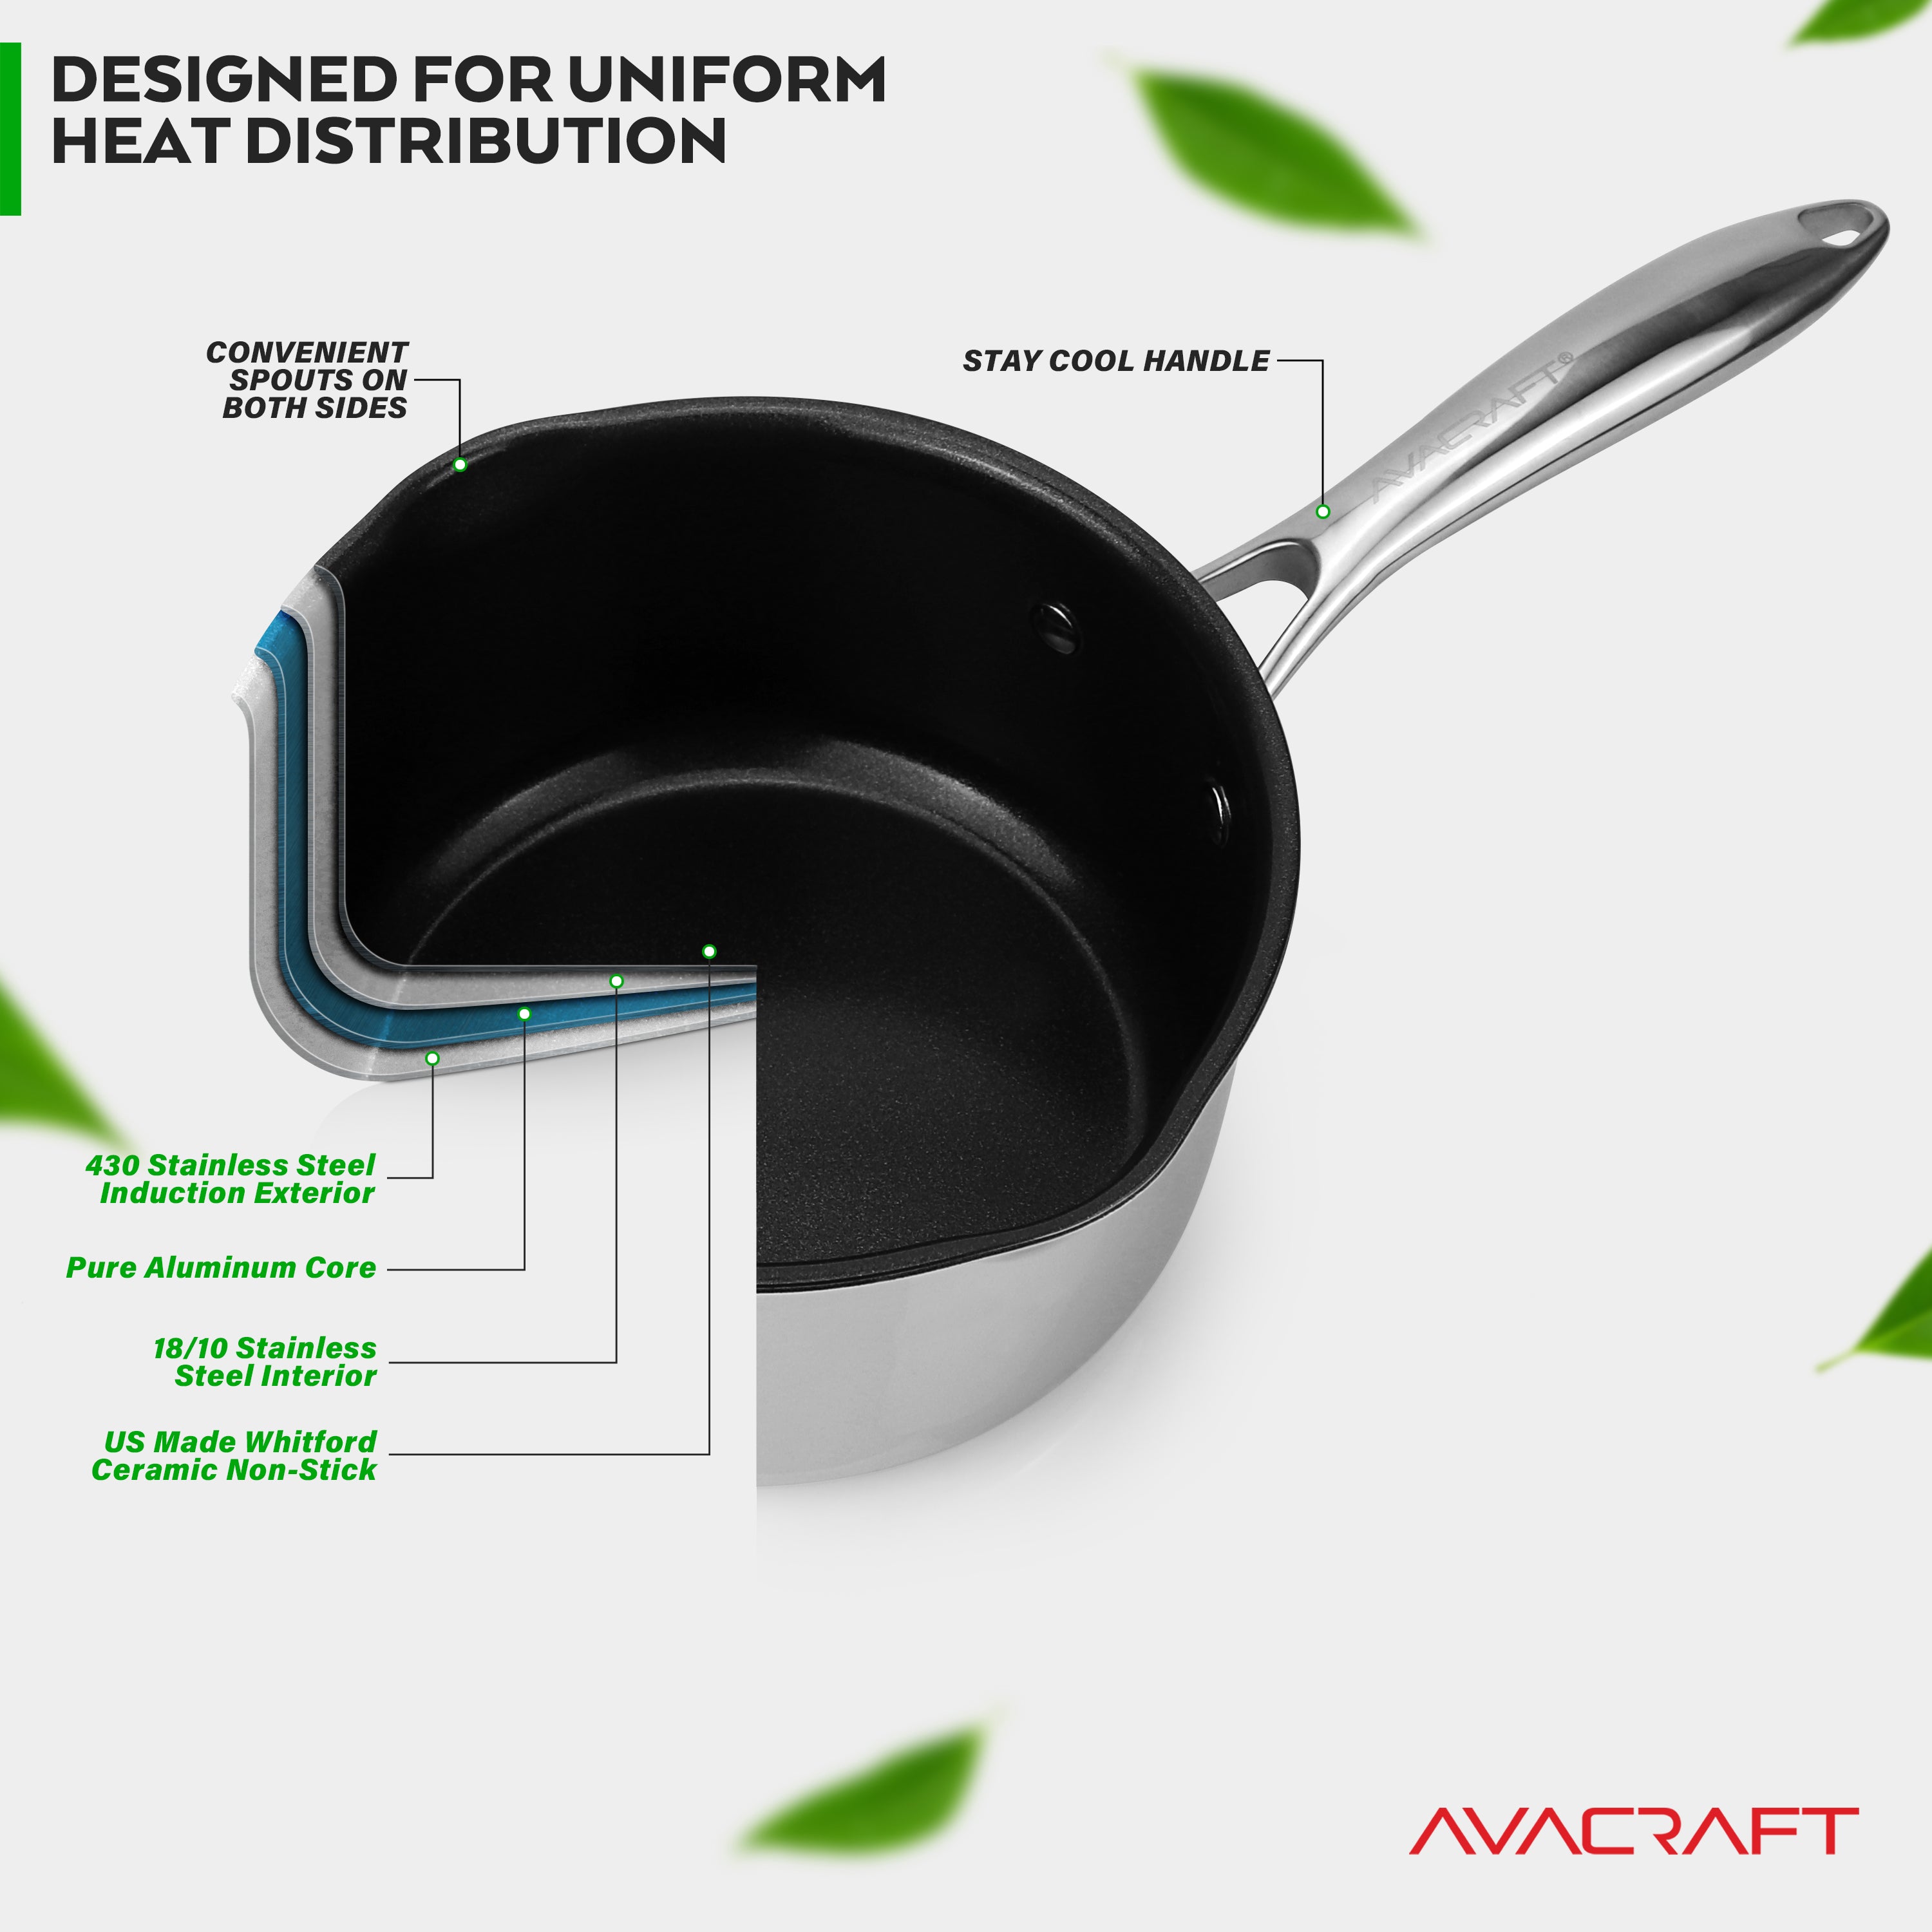 AVACRAFT Stainless Steel Saucepan with Glass Strainer Lid, Two Side Spouts  for Easy Pour with Ergonomic Handle, Multipurpose Sauce Pot (Tri-Ply